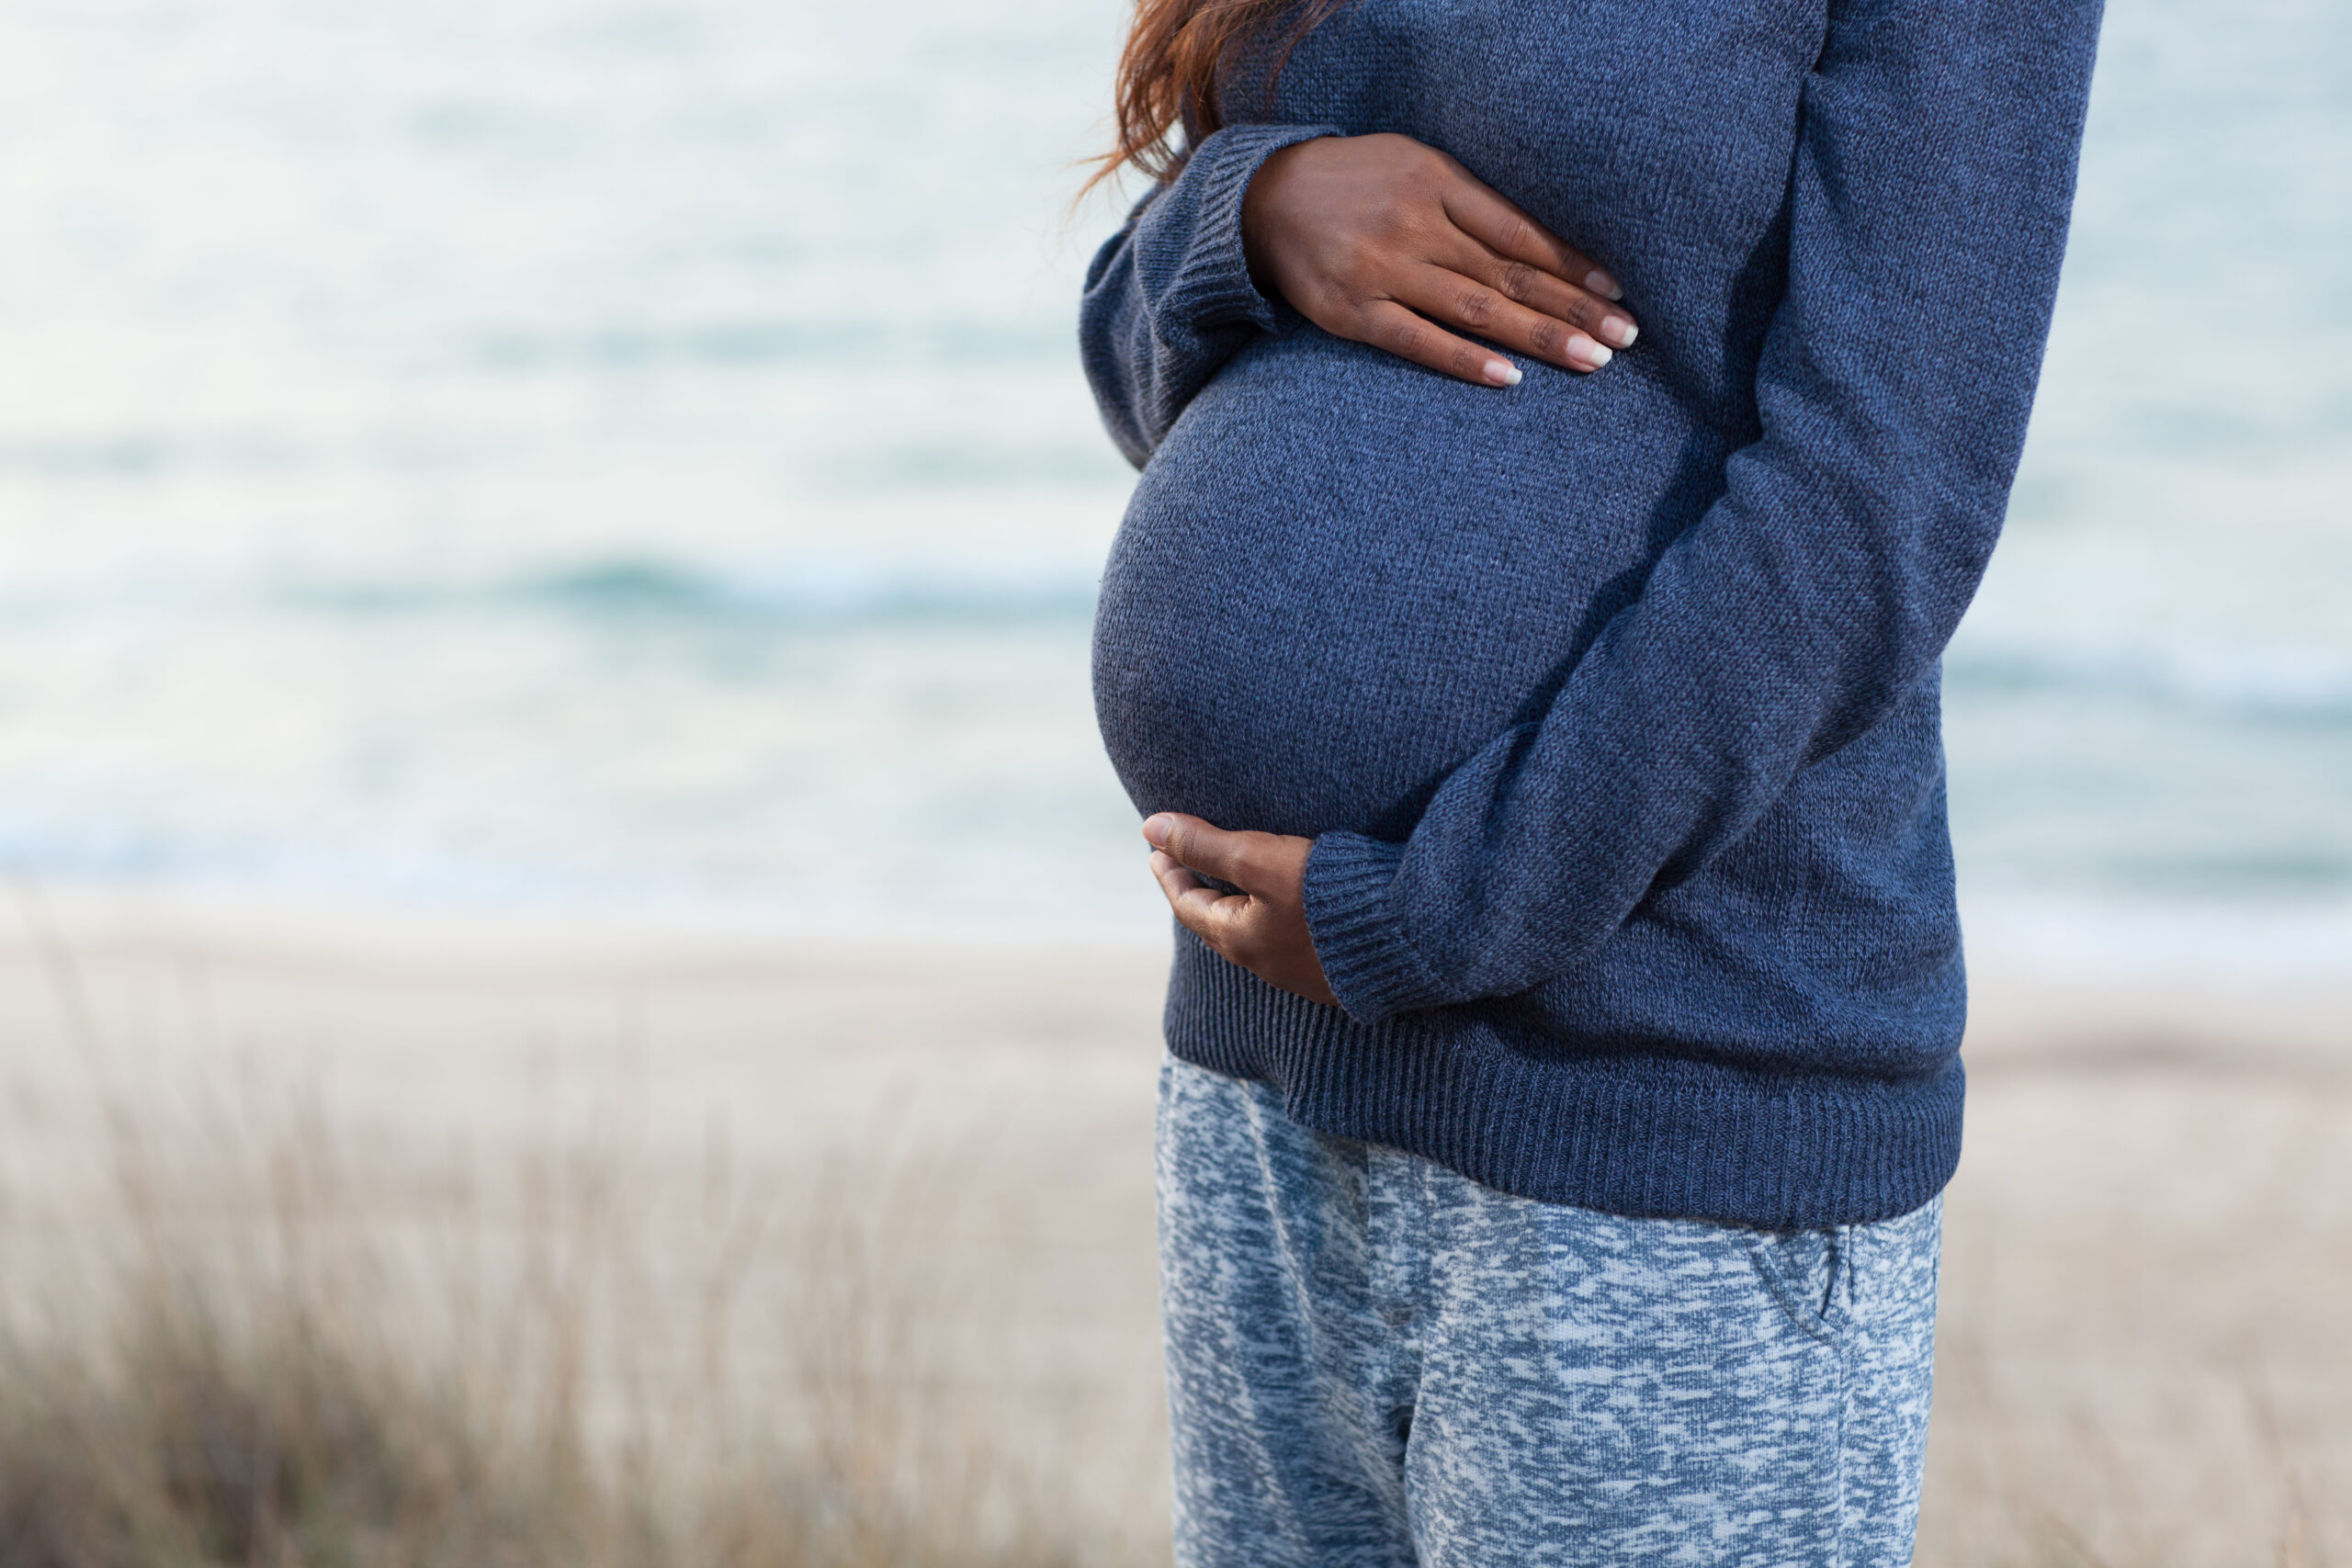 Close up on pregnant woman belly. Unrecognized pregnant woman in her trimester touching and stroking her big belly, standing on a sea shore.